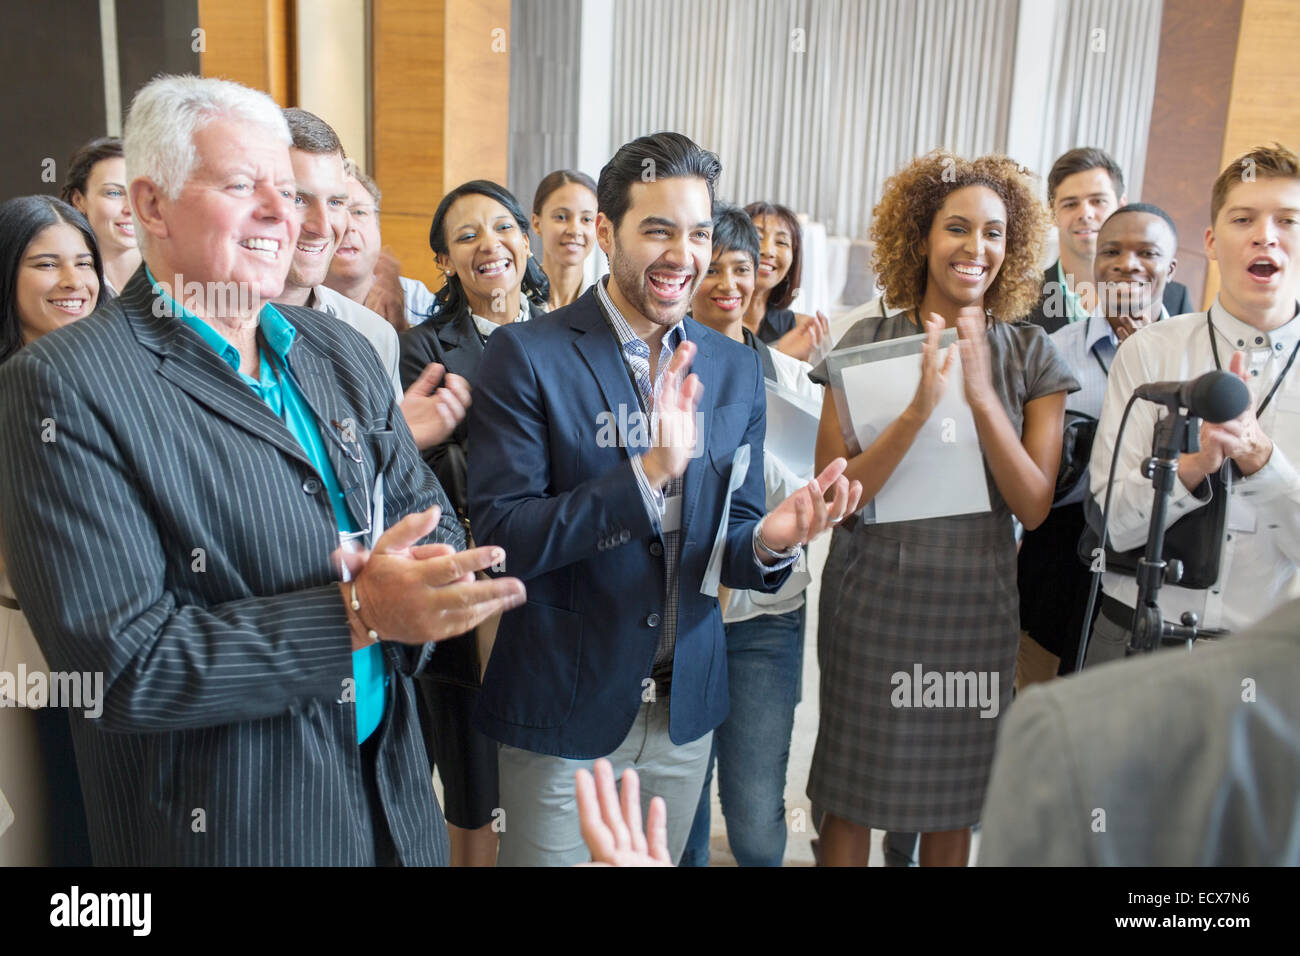 Group of people applauding after speech during conference Stock Photo